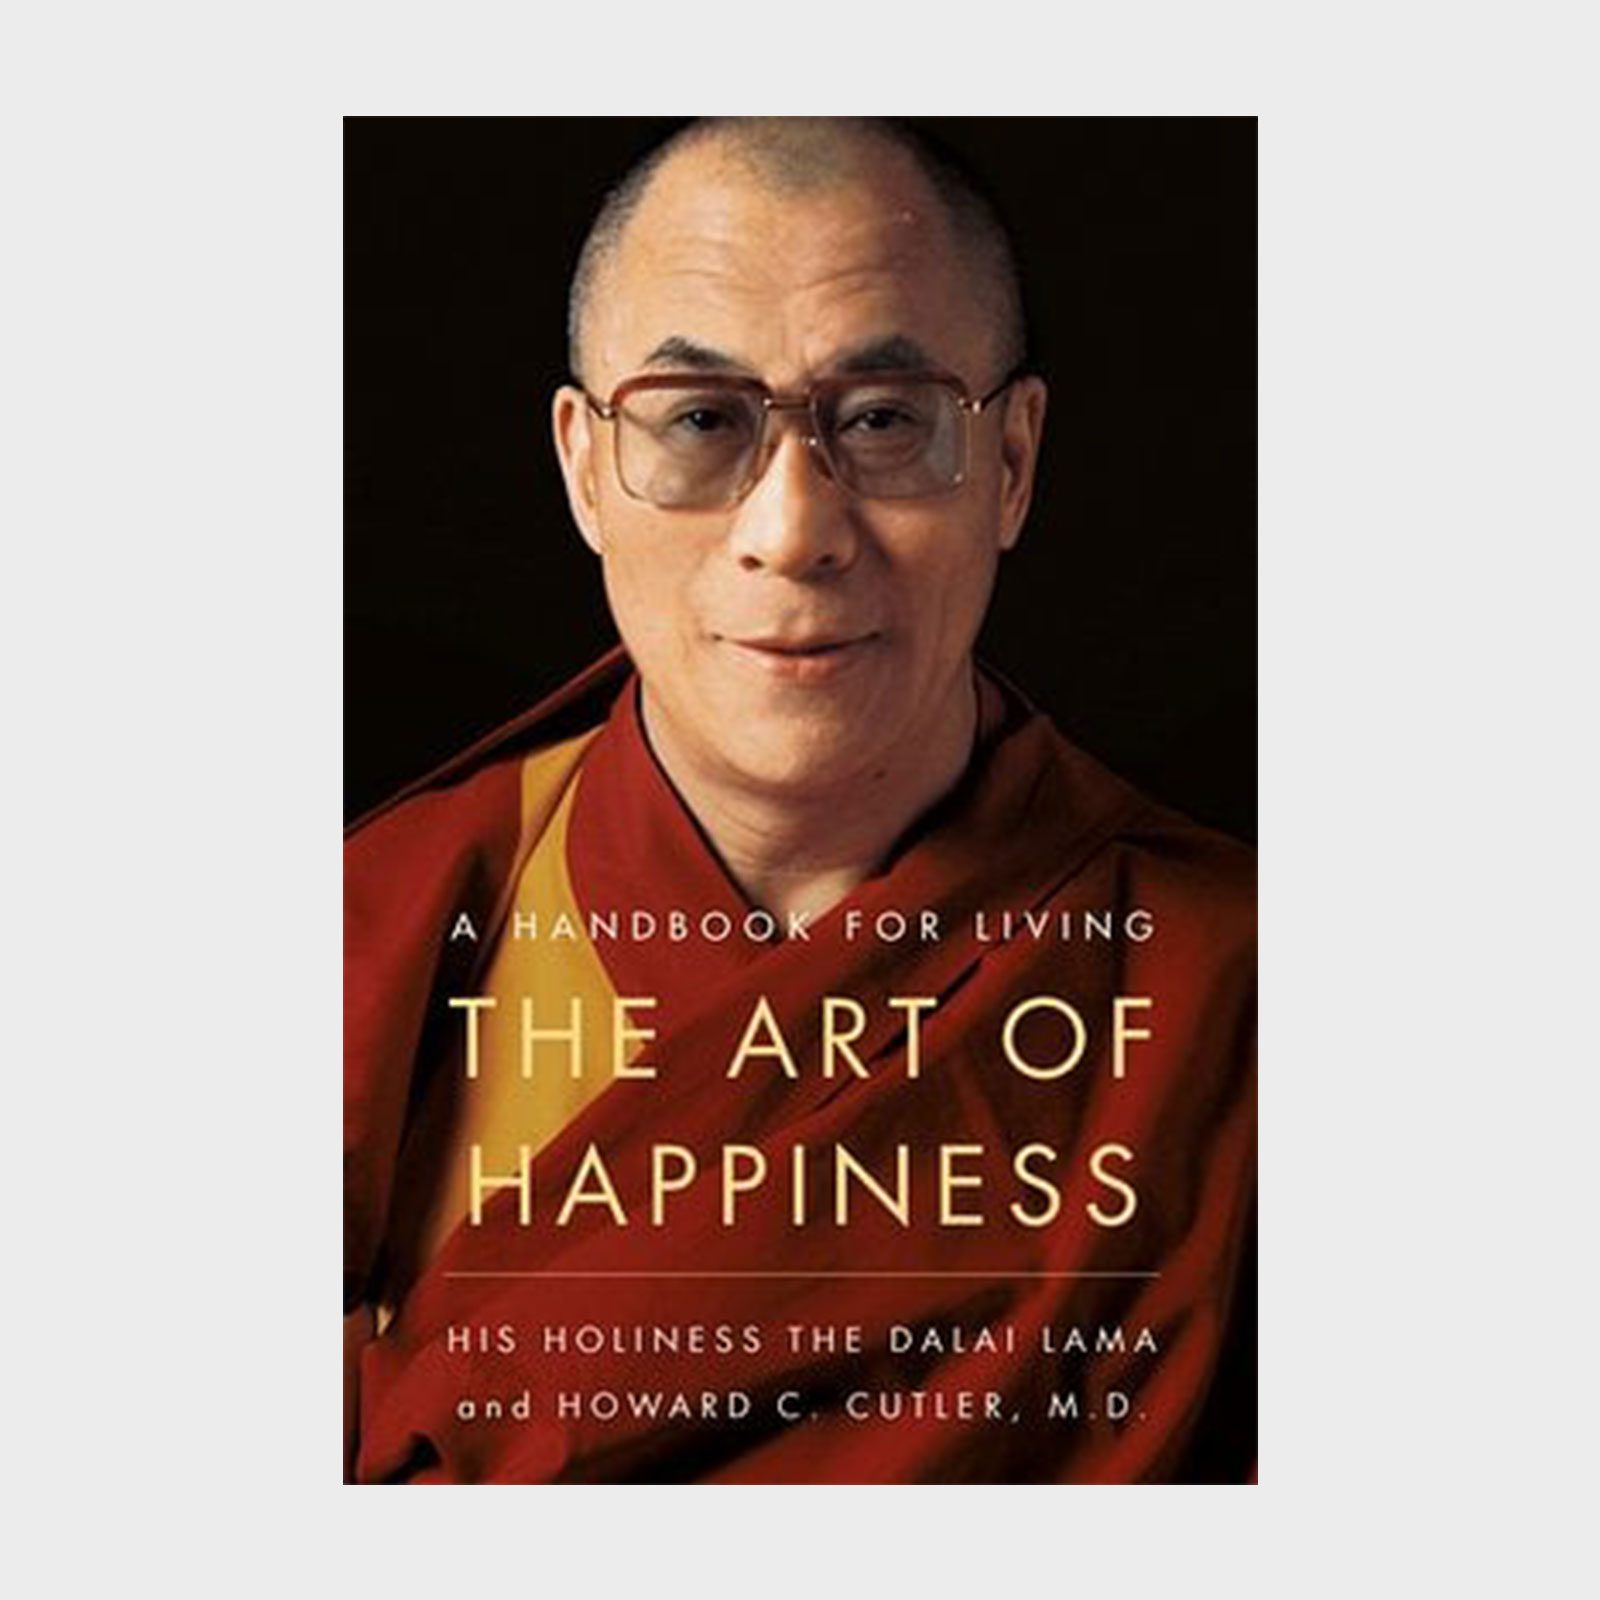 <p>Happiness is the key to life. At least, that's what spiritual leader The Dalai Lama explores in his 1998 inspirational book, <a href="https://bookshop.org/p/books/the-art-of-happiness-a-handbook-for-living-dalai-lama/14671107?ean=9781573227544" rel="noopener"><em>The Art of Happiness</em></a>. As humans, we want to achieve <a href="https://www.rd.com/list/happiness-secrets/">happiness</a>, but the harder question to answer is how. Learning how to navigate insecurity, discouragement and anxiety are a few things this book explores, using meditation, stories and conversations as examples to help readers through common difficulties.</p> <p class="listicle-page__cta-button-shop"><a class="shop-btn" href="https://bookshop.org/p/books/the-art-of-happiness-a-handbook-for-living-dalai-lama/14671107?ean=9781573227544">Shop Now</a></p>